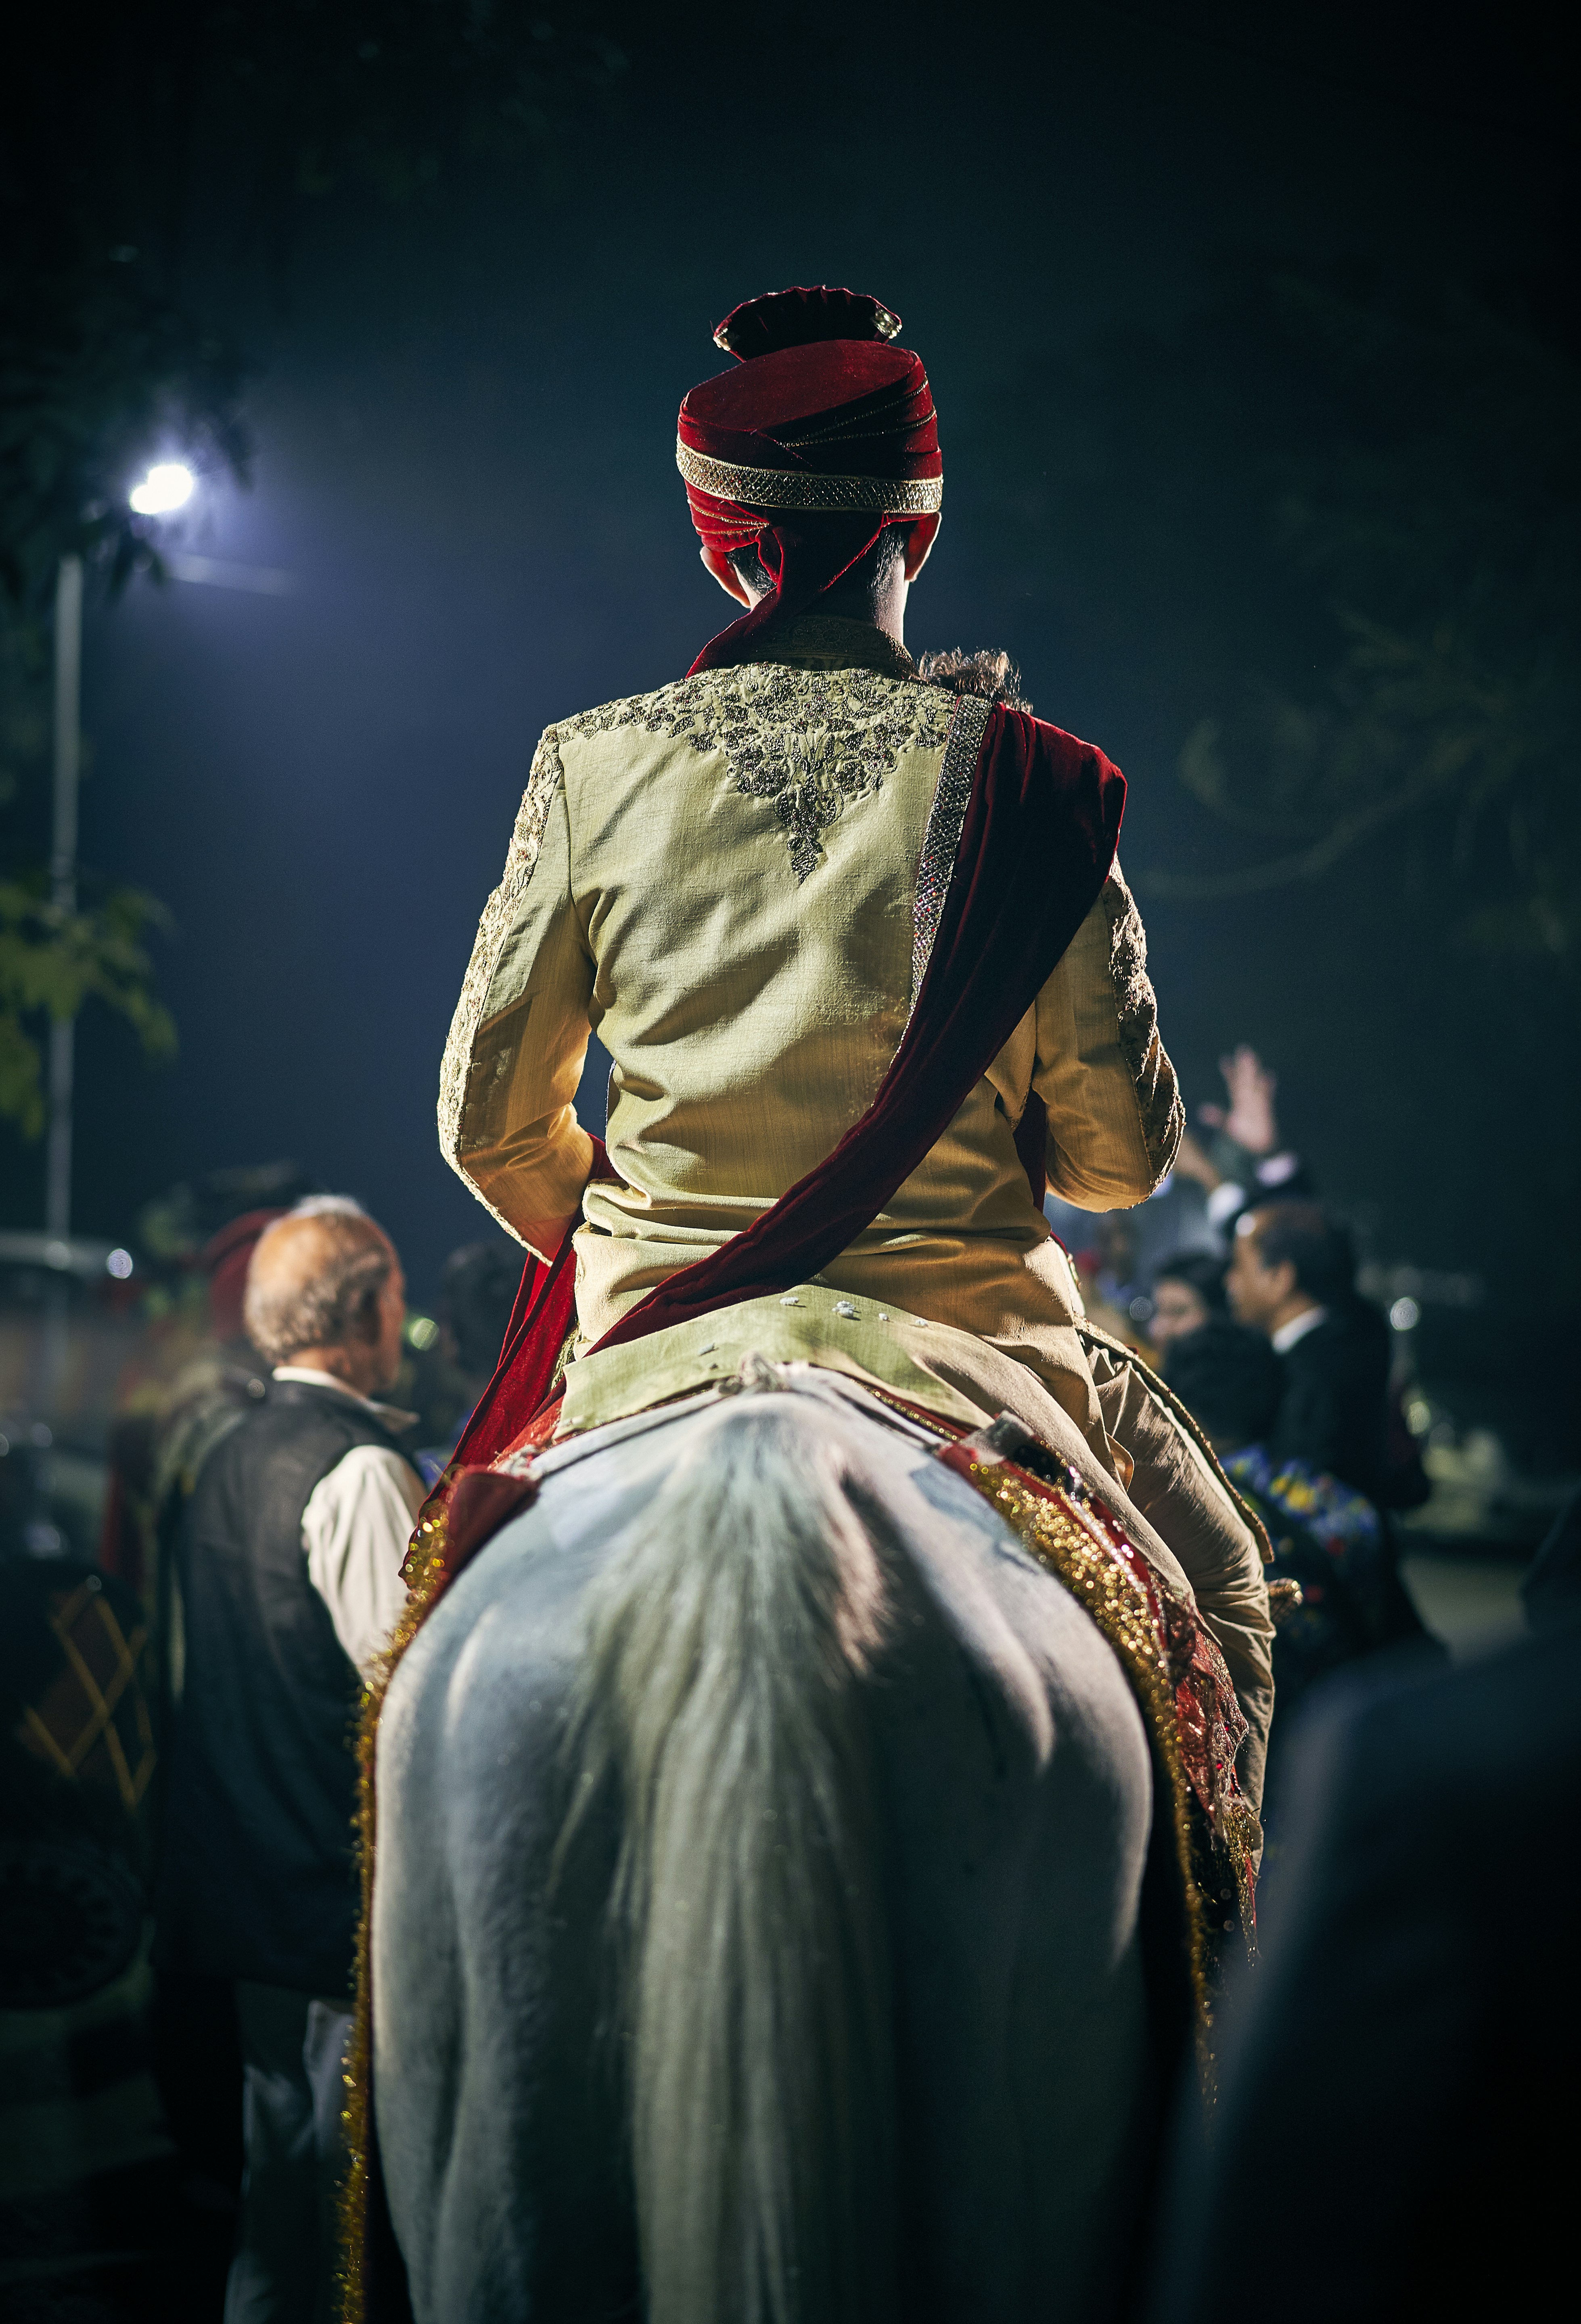 person sitting on horse near people during night